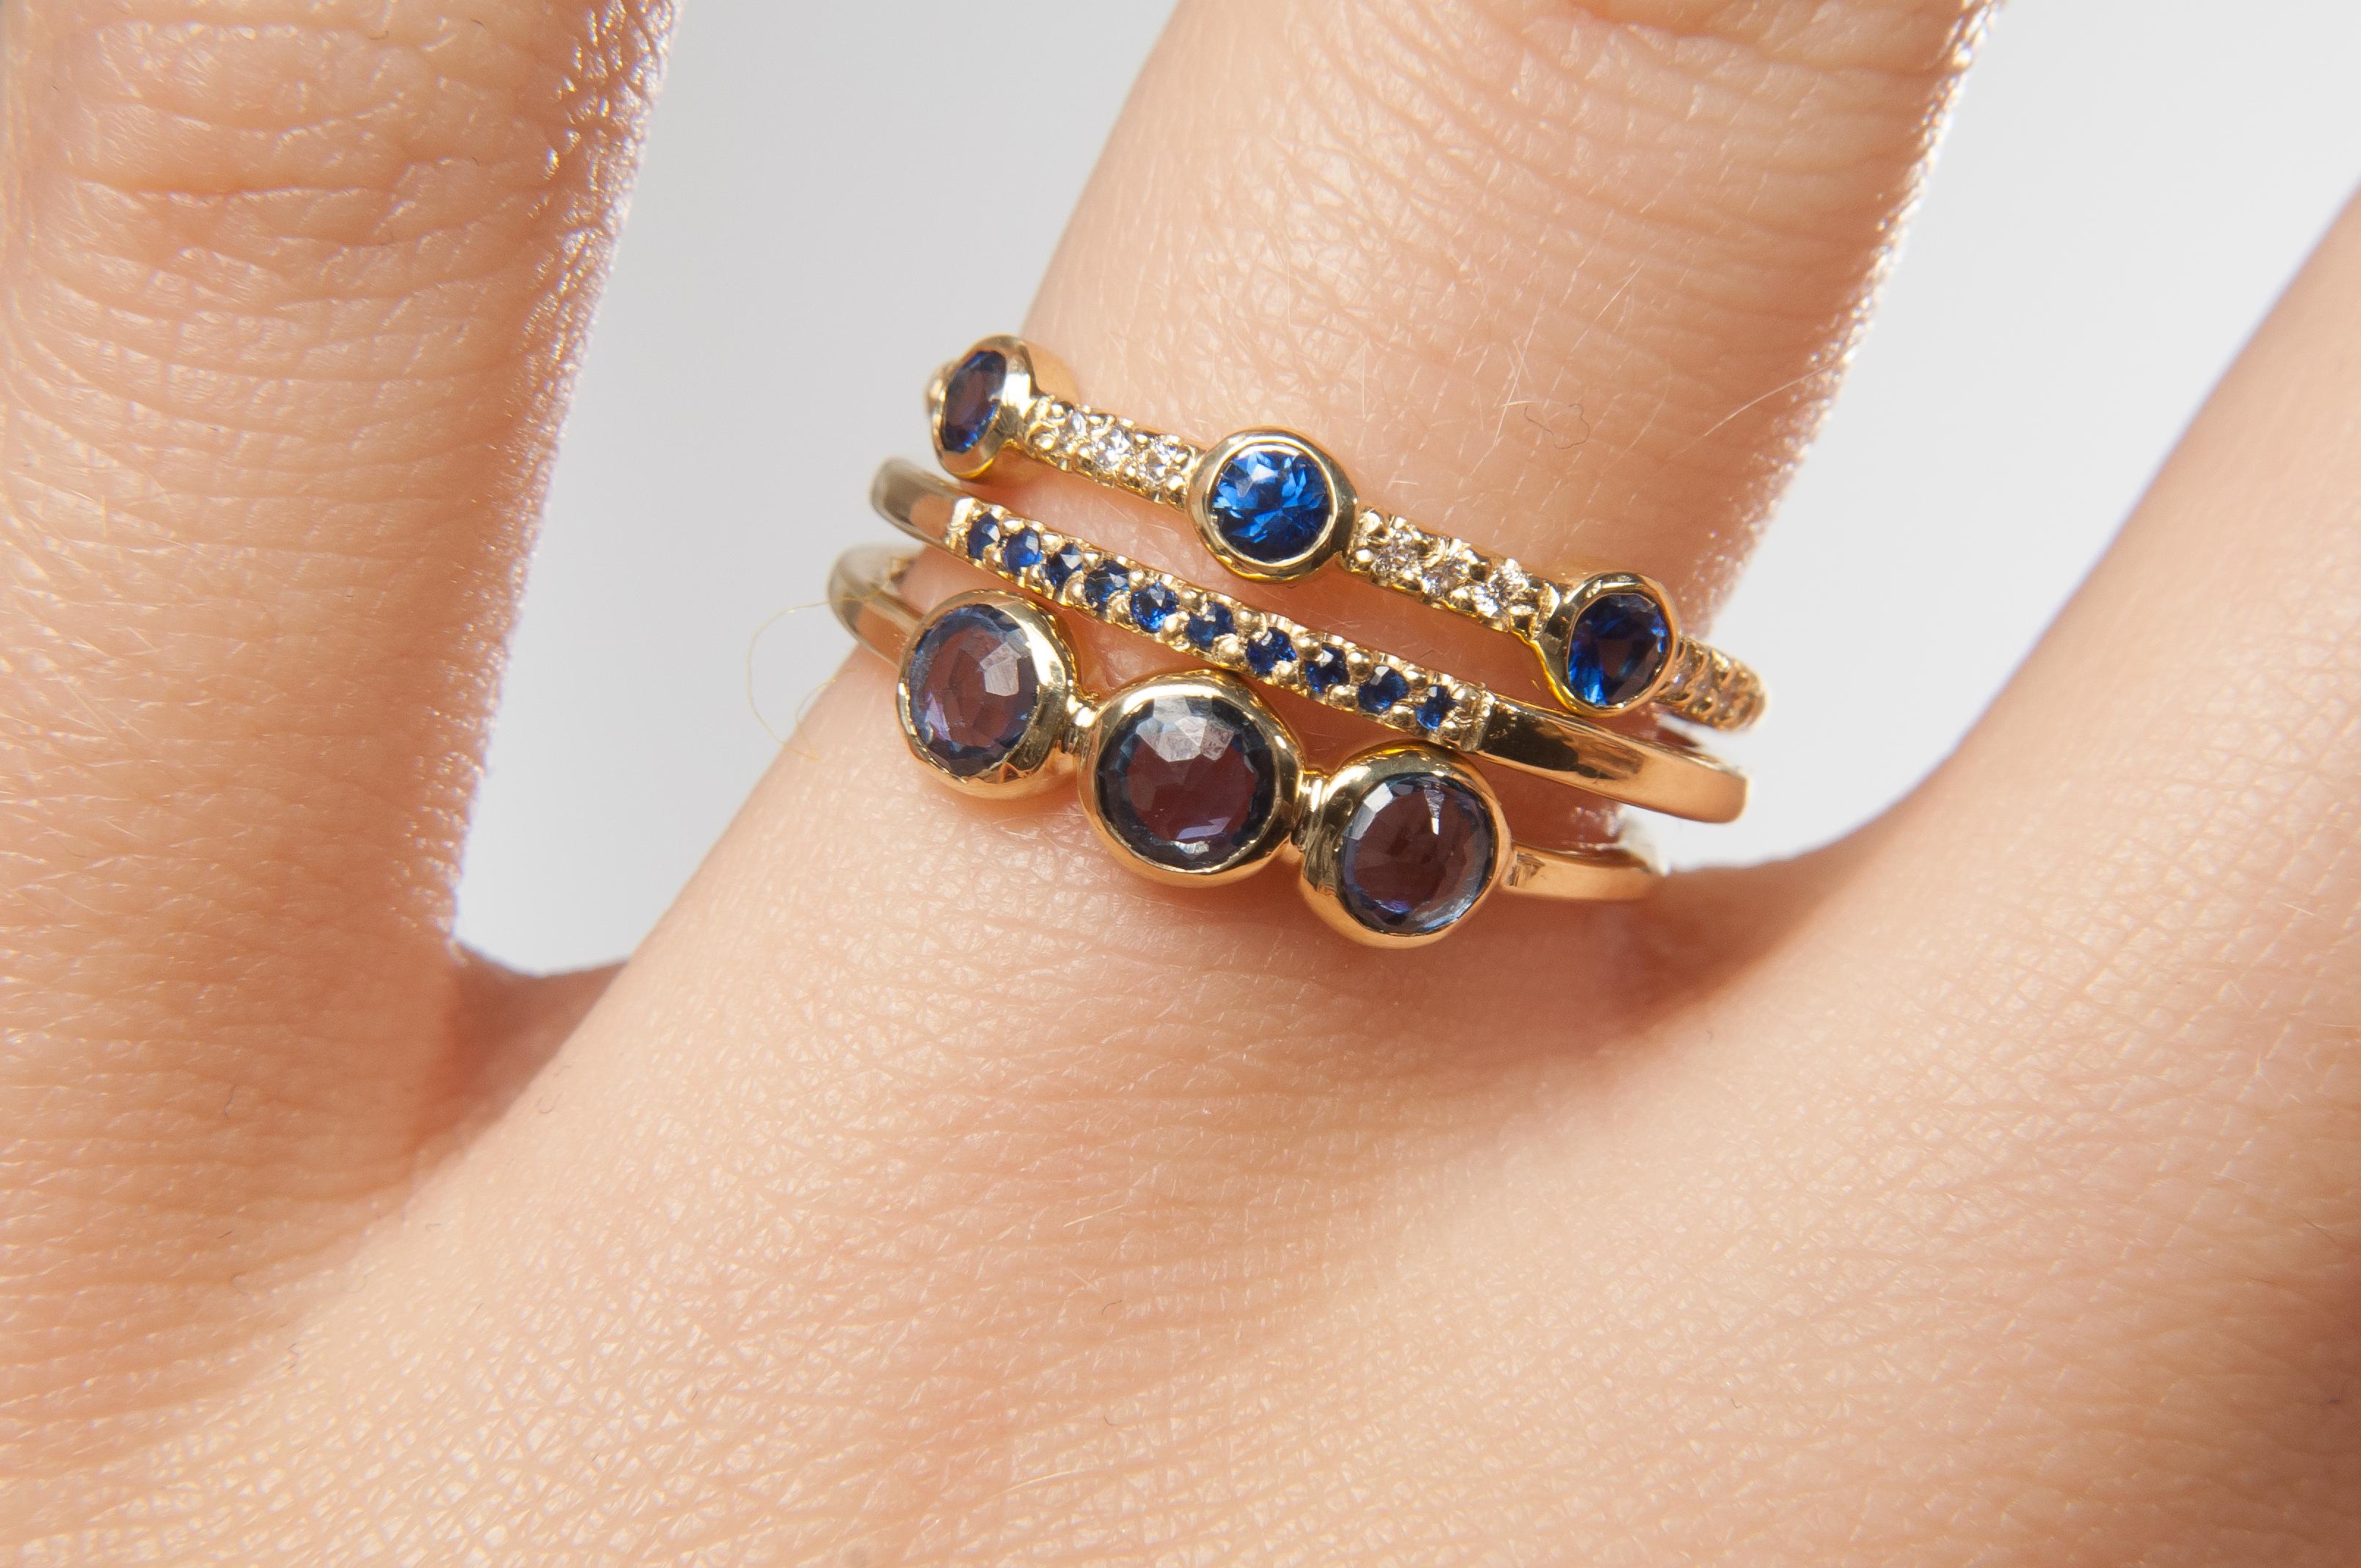 Update your look with this modern take on a classic three stone ring.

18K yellow gold band set with three bezel set 0.12” blue sapphires.

Size 6.5